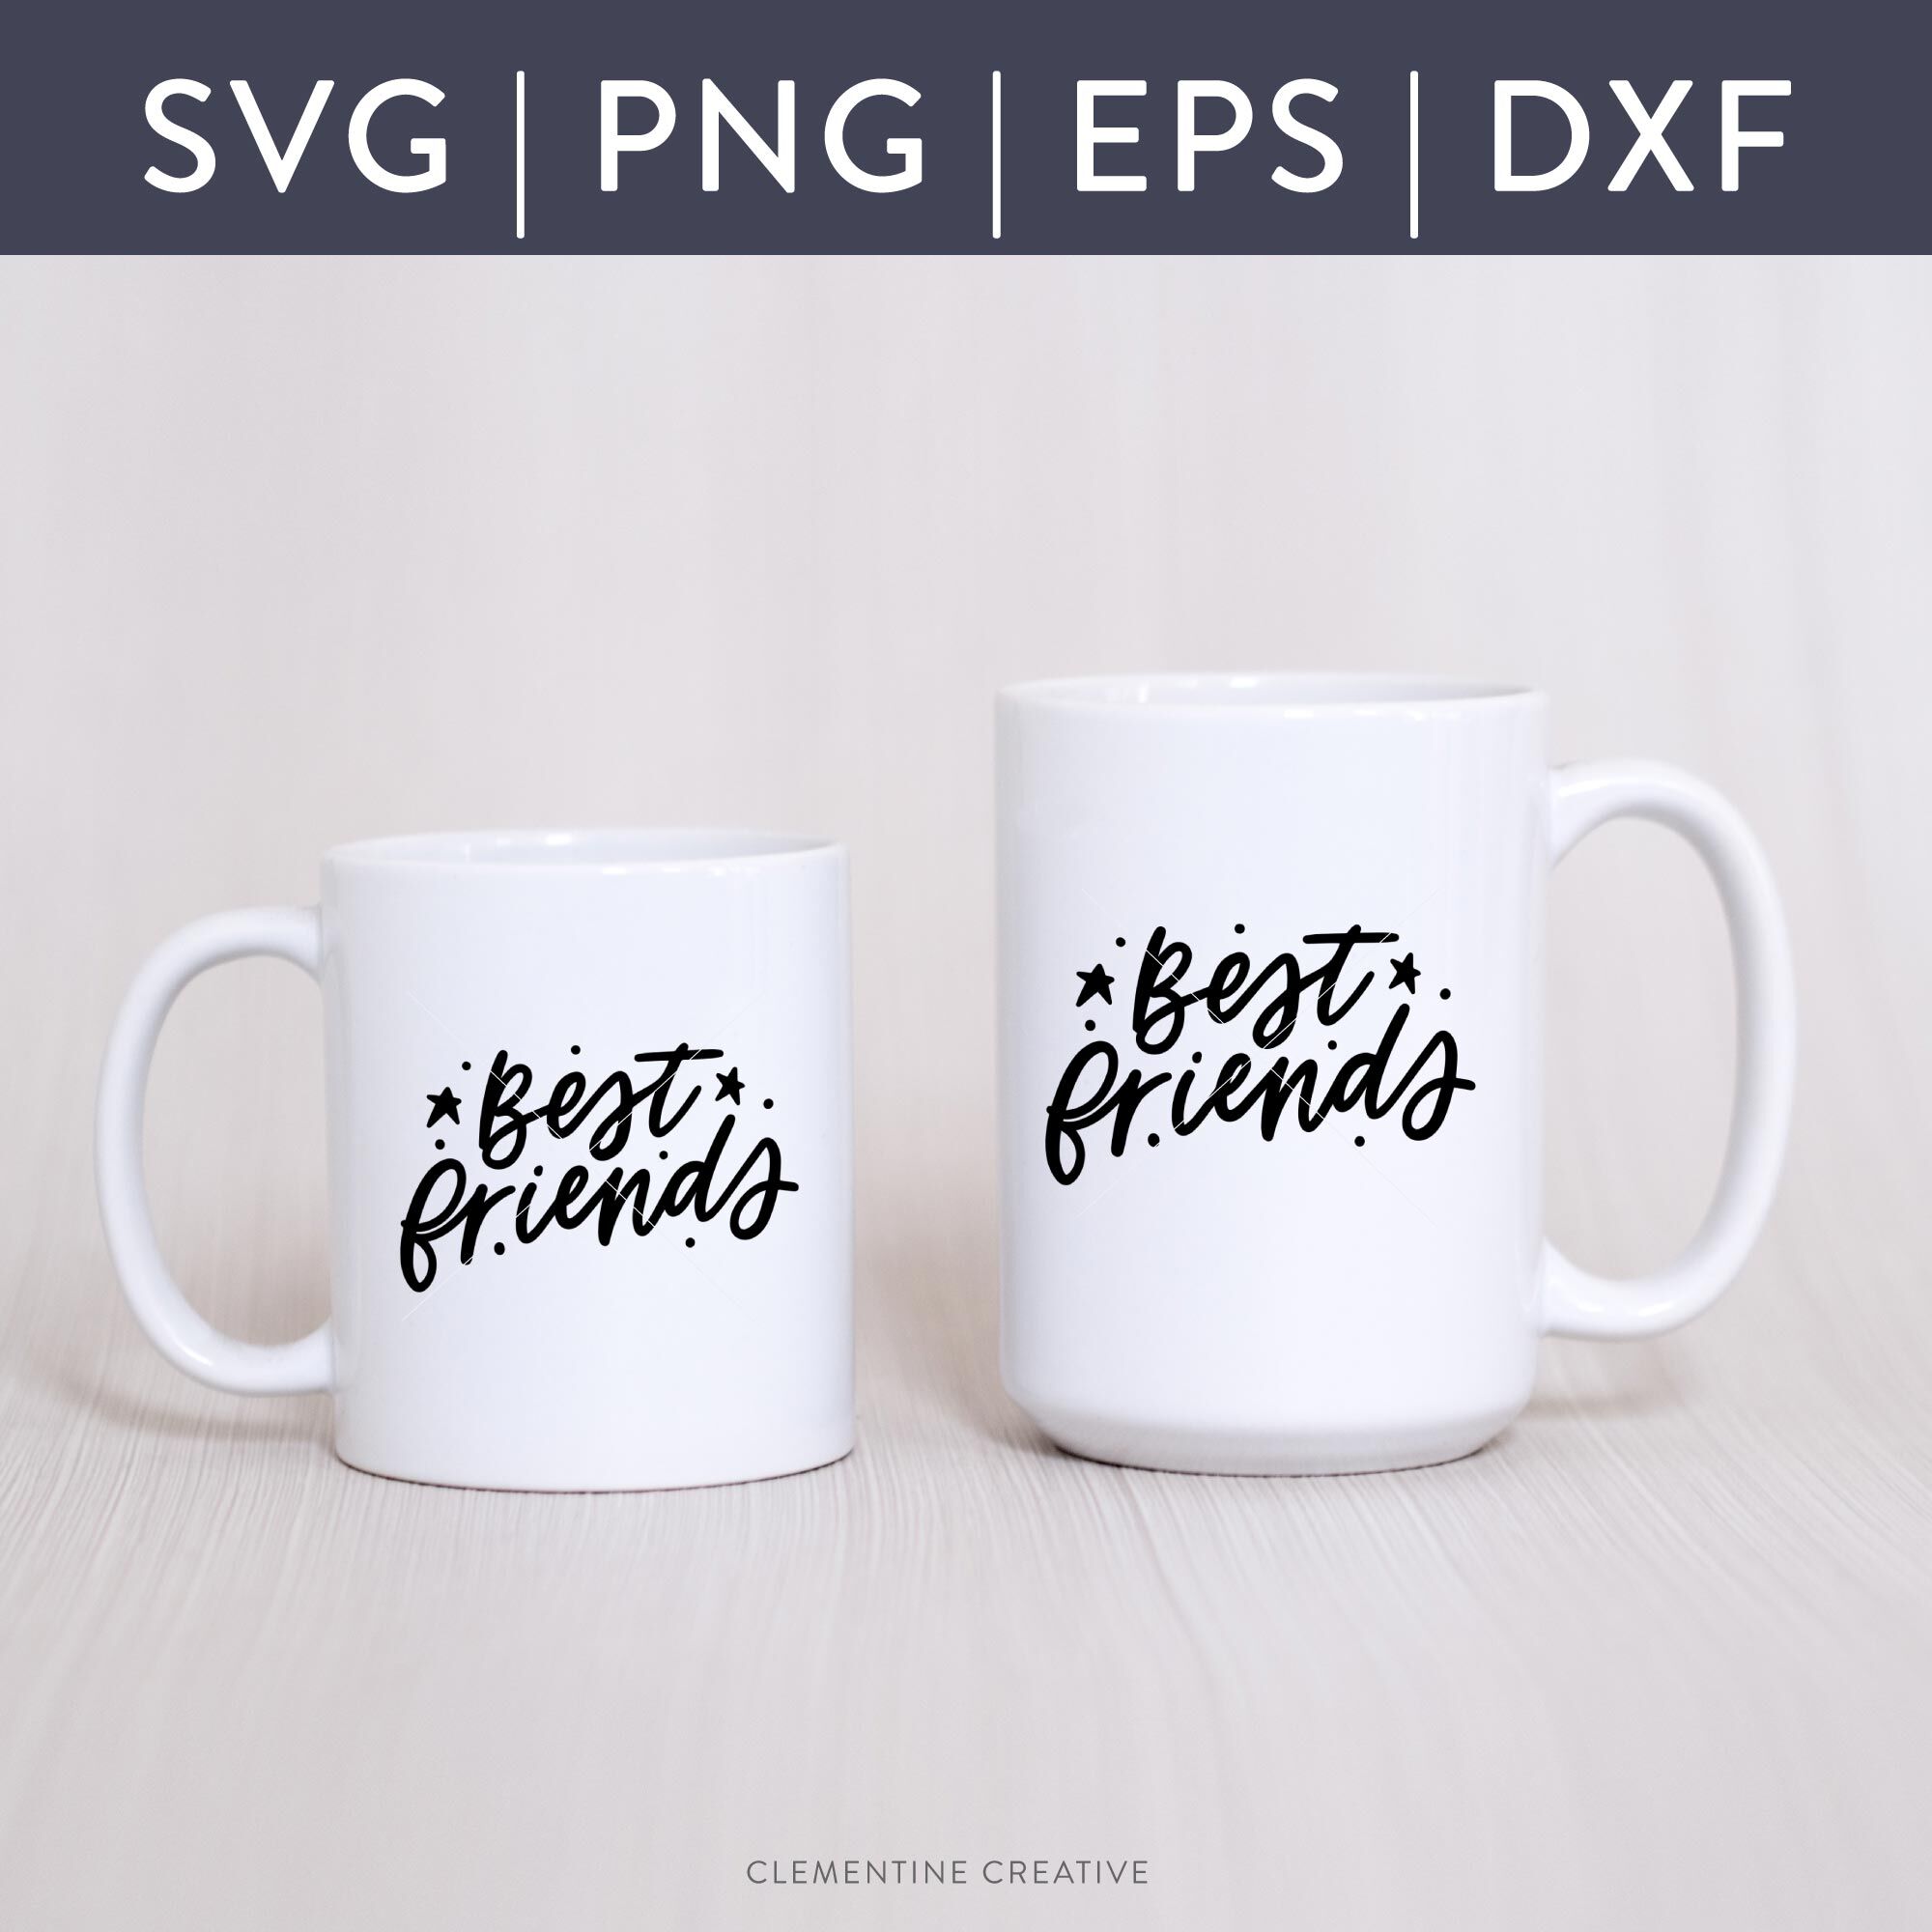 Best Friends Svg Best Friends Cut File Svg Dxf Eps Png Bff Cu By Clementine Creative Thehungryjpeg Com